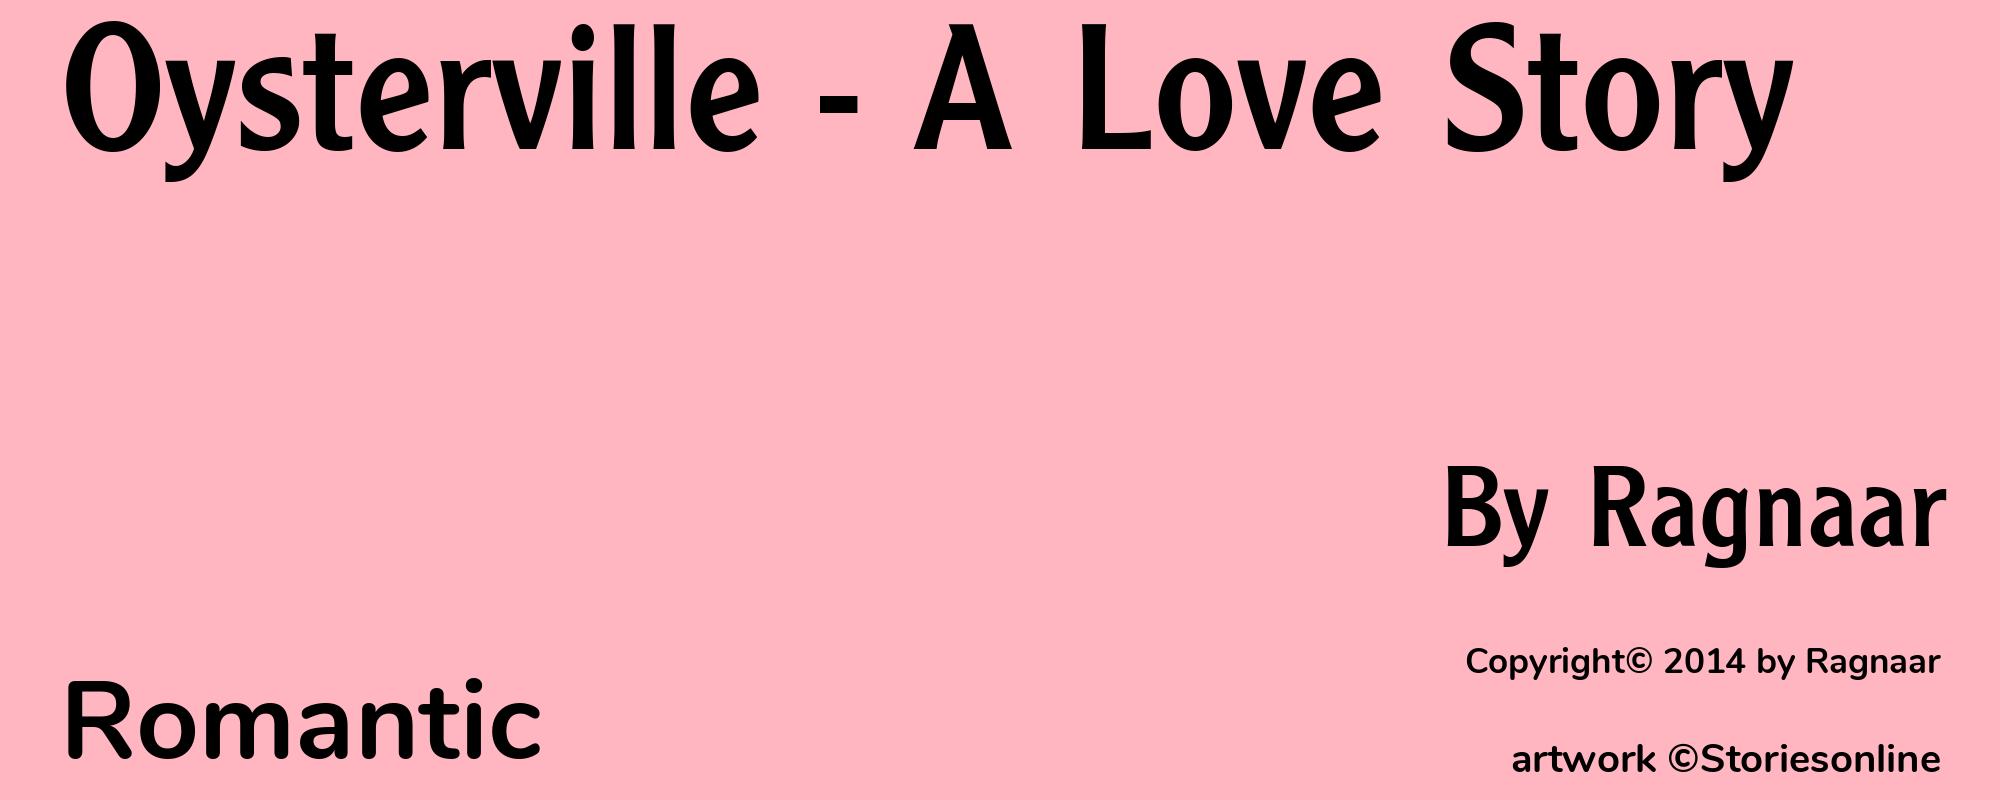 Oysterville - A Love Story - Cover